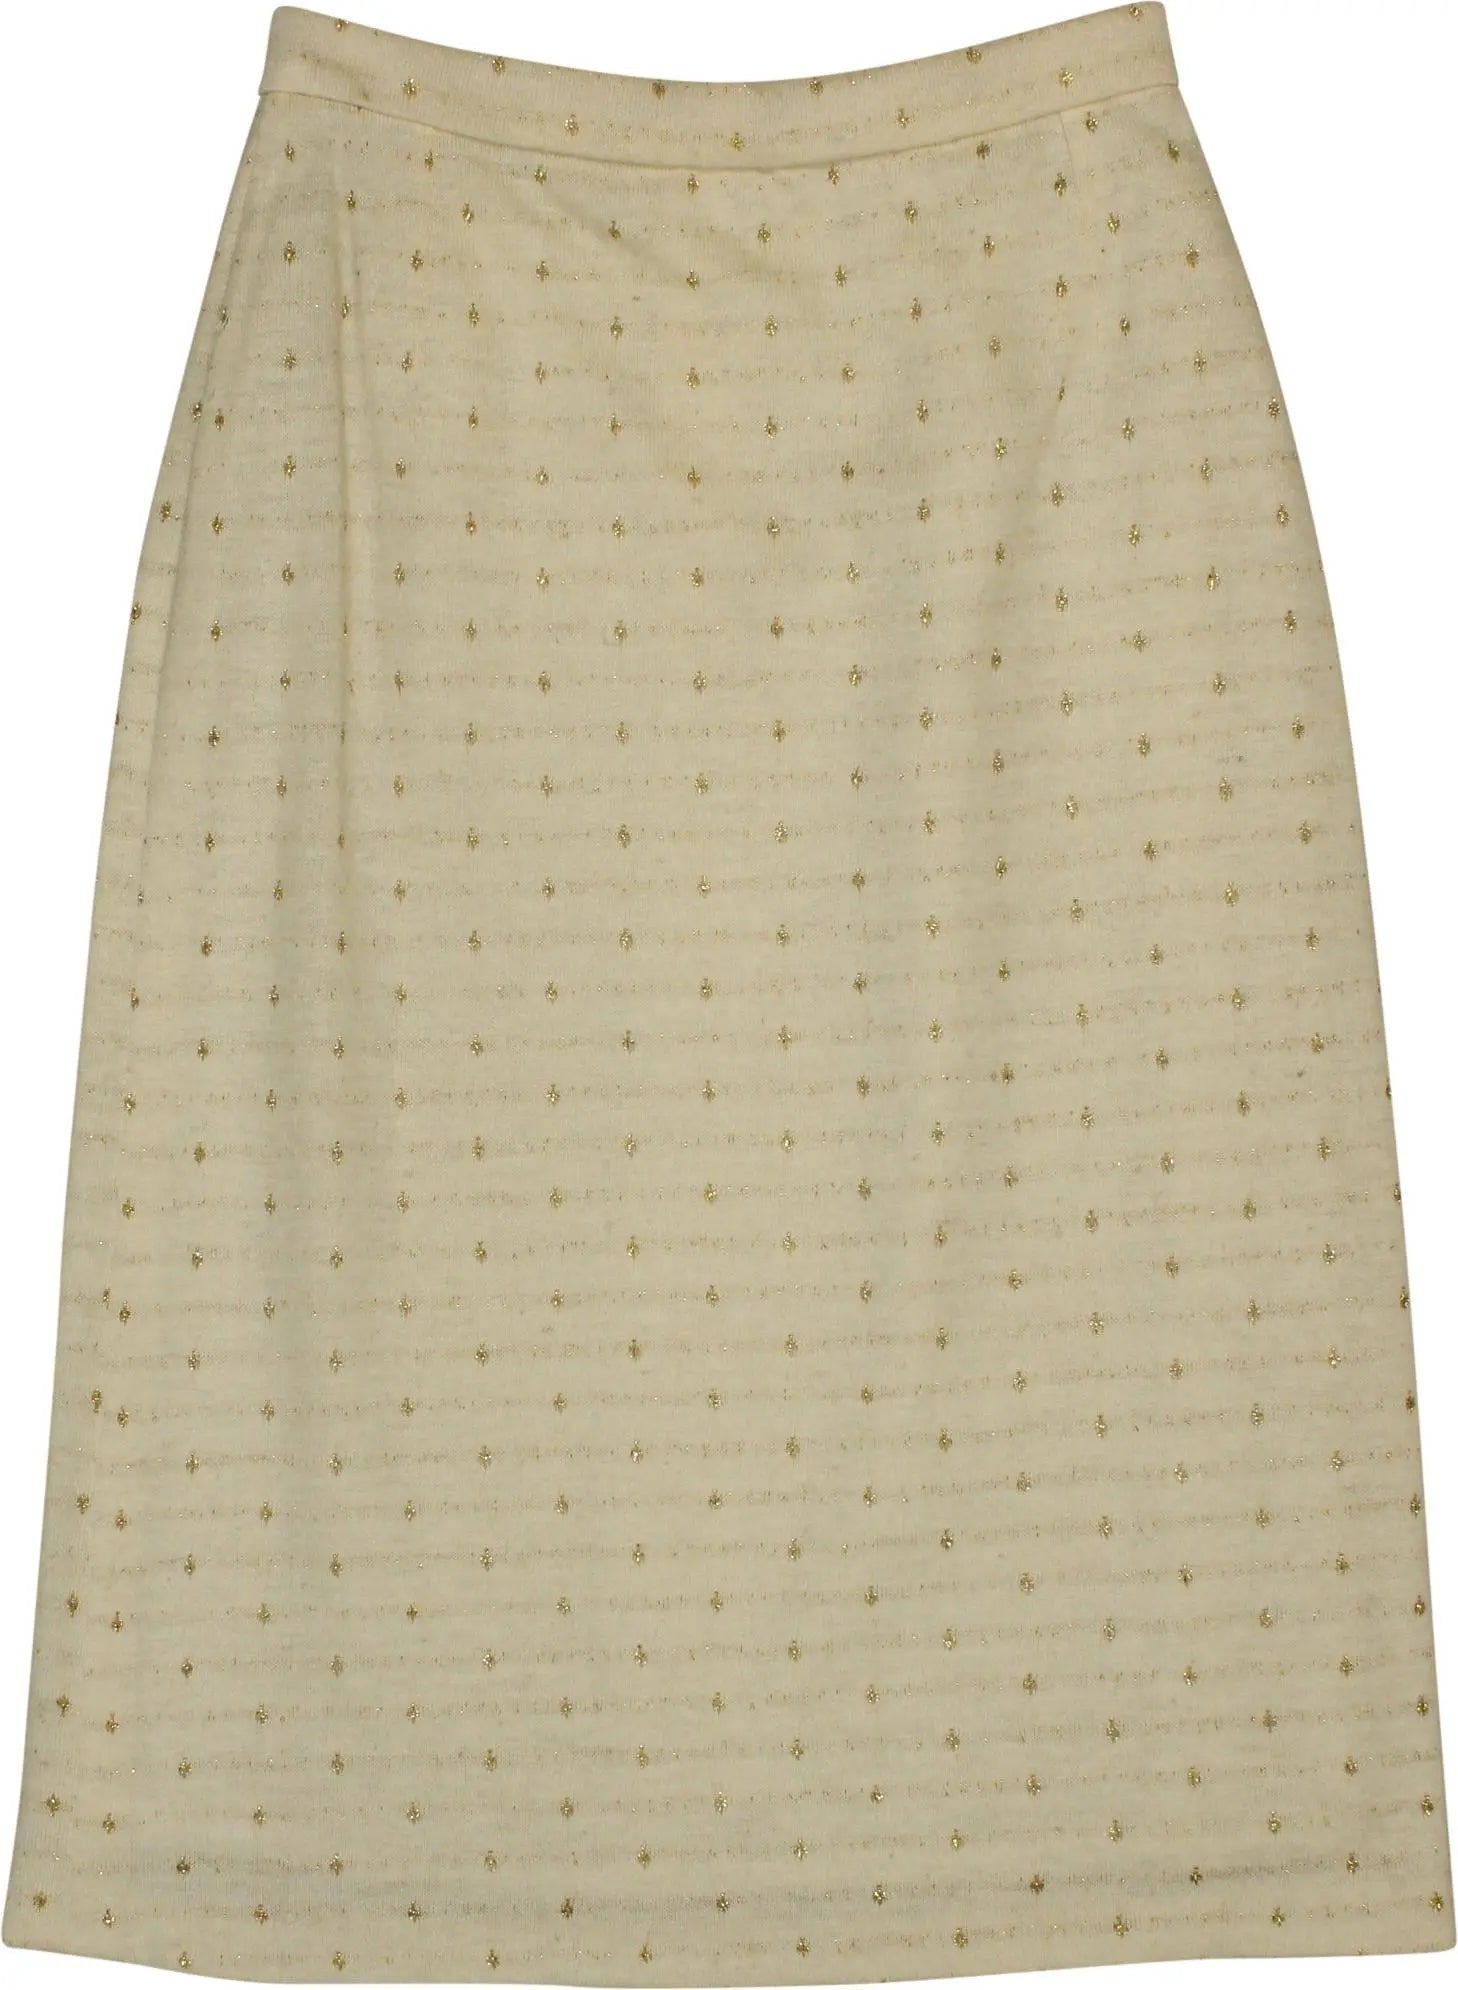 Handmade - Handmade Knitted Pencil Skirt- ThriftTale.com - Vintage and second handclothing